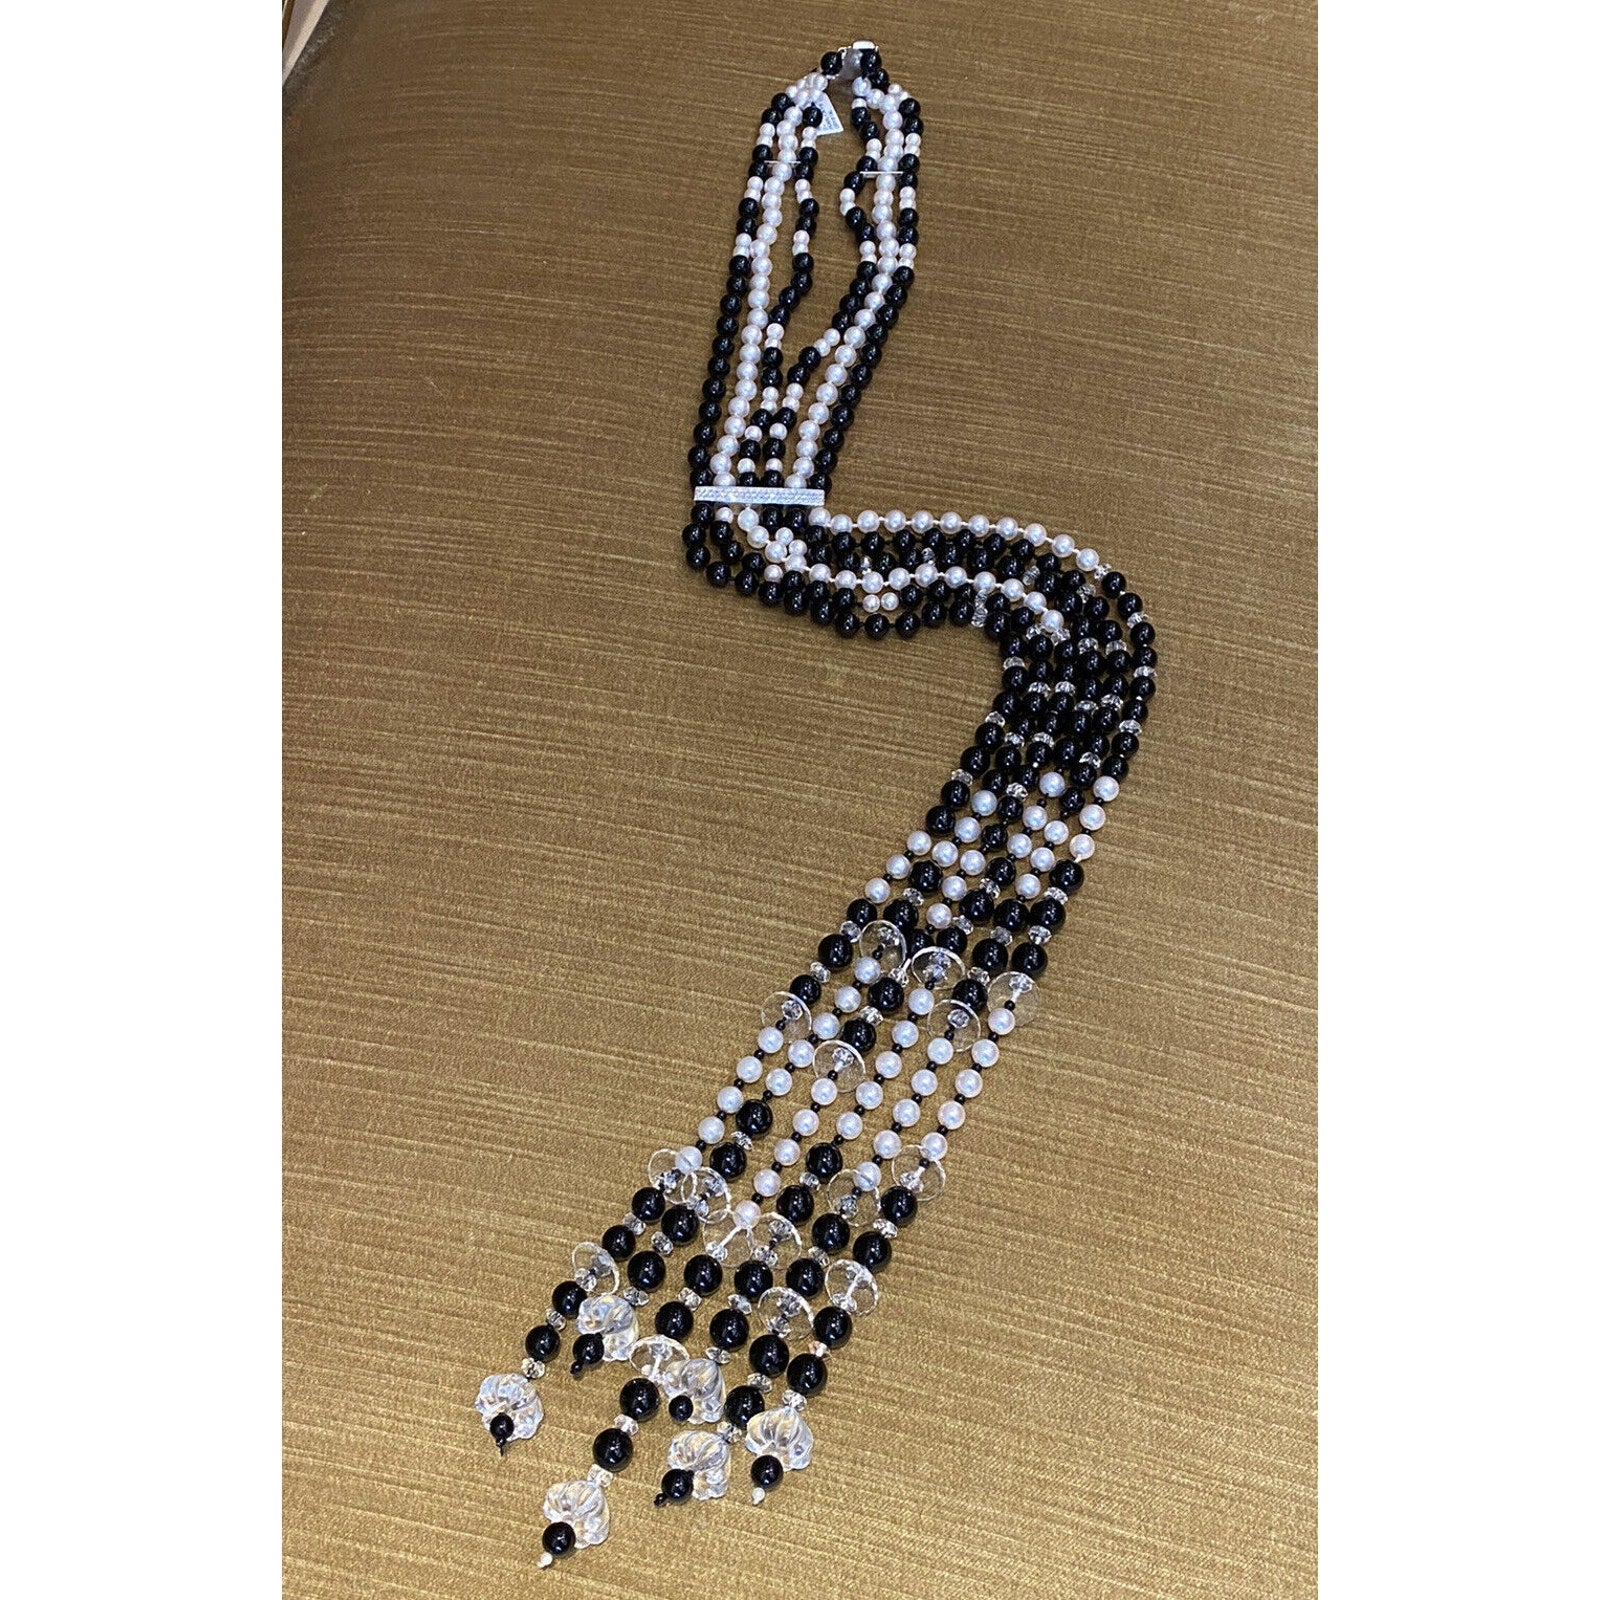 50" Multi-strand Pearl and Onyx Tassel Necklace with 18k White Gold Diamond Bar